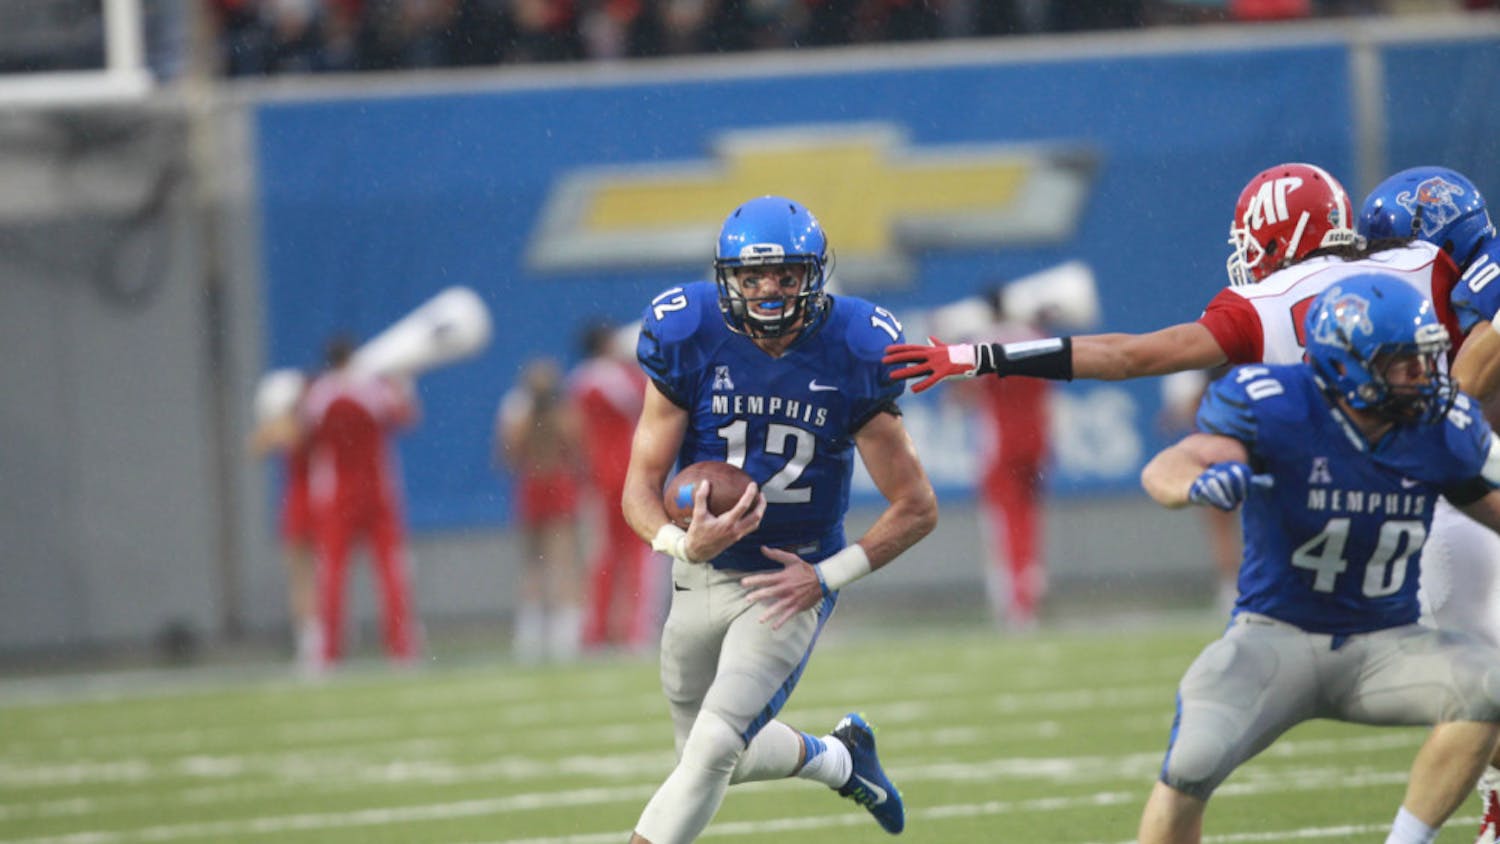 Huge potential for Memphis offense in 2015